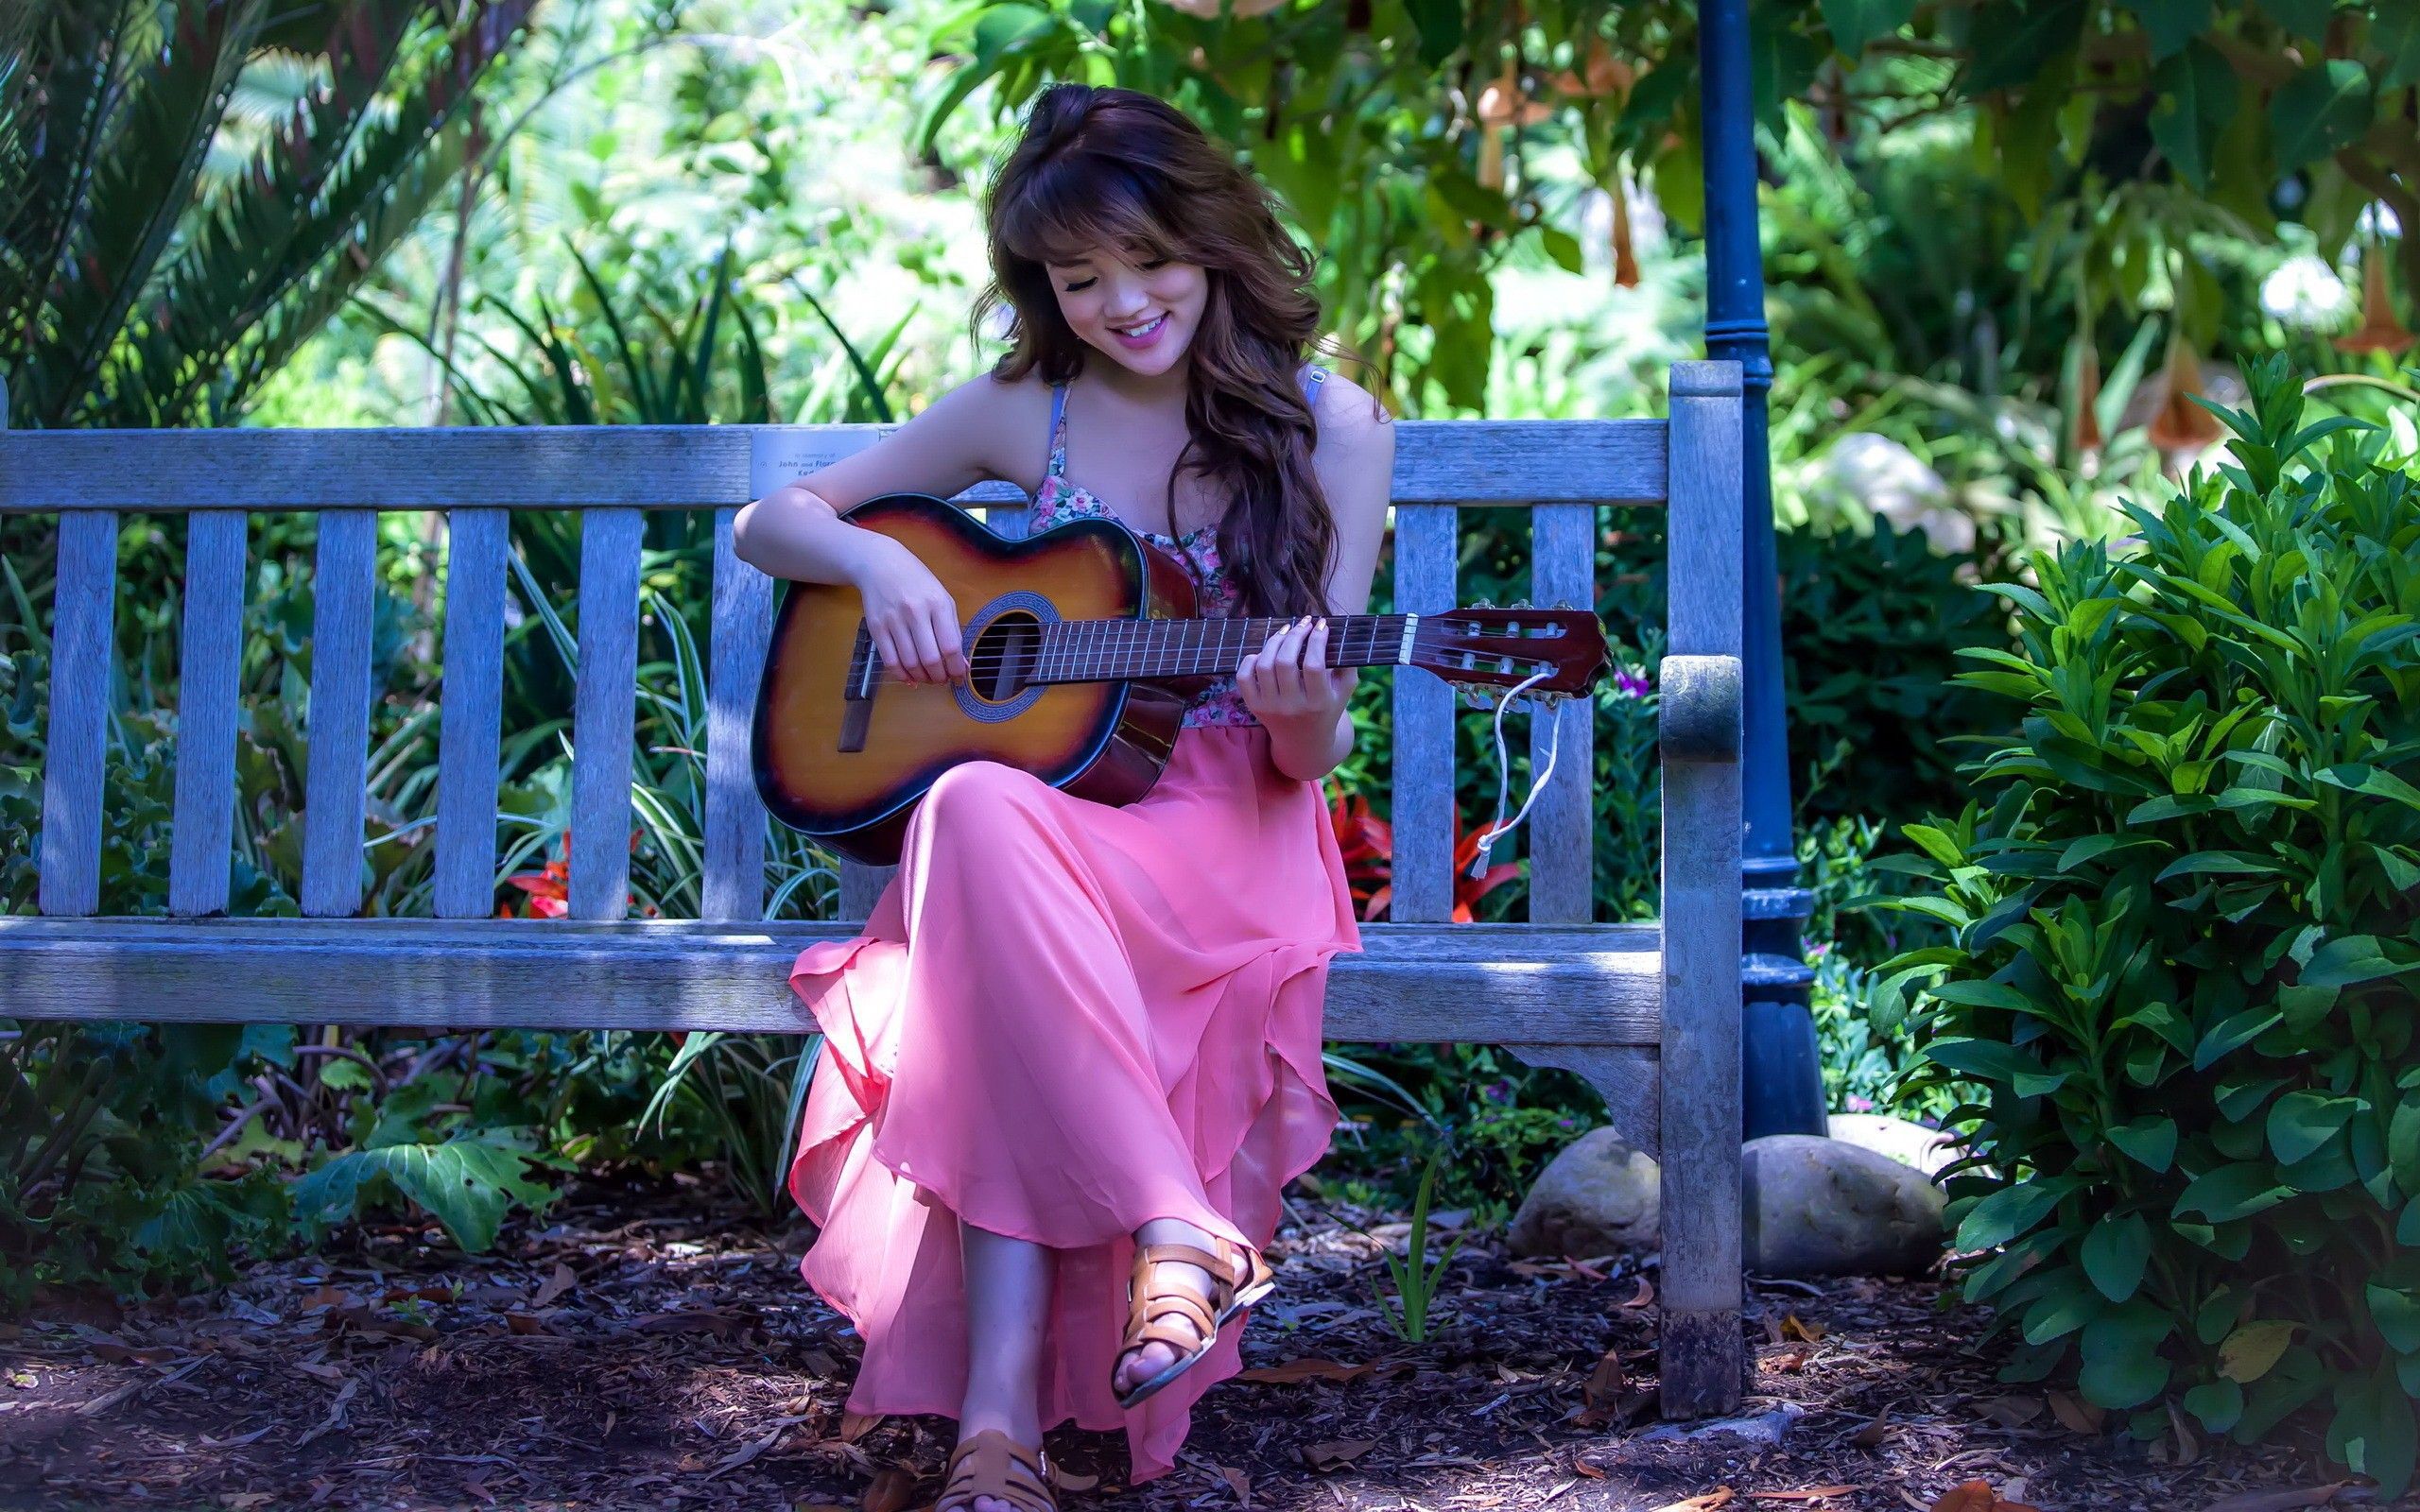 A Girl Sits On A Bench In The Garden And Playing Guitar Image With Cute Girl